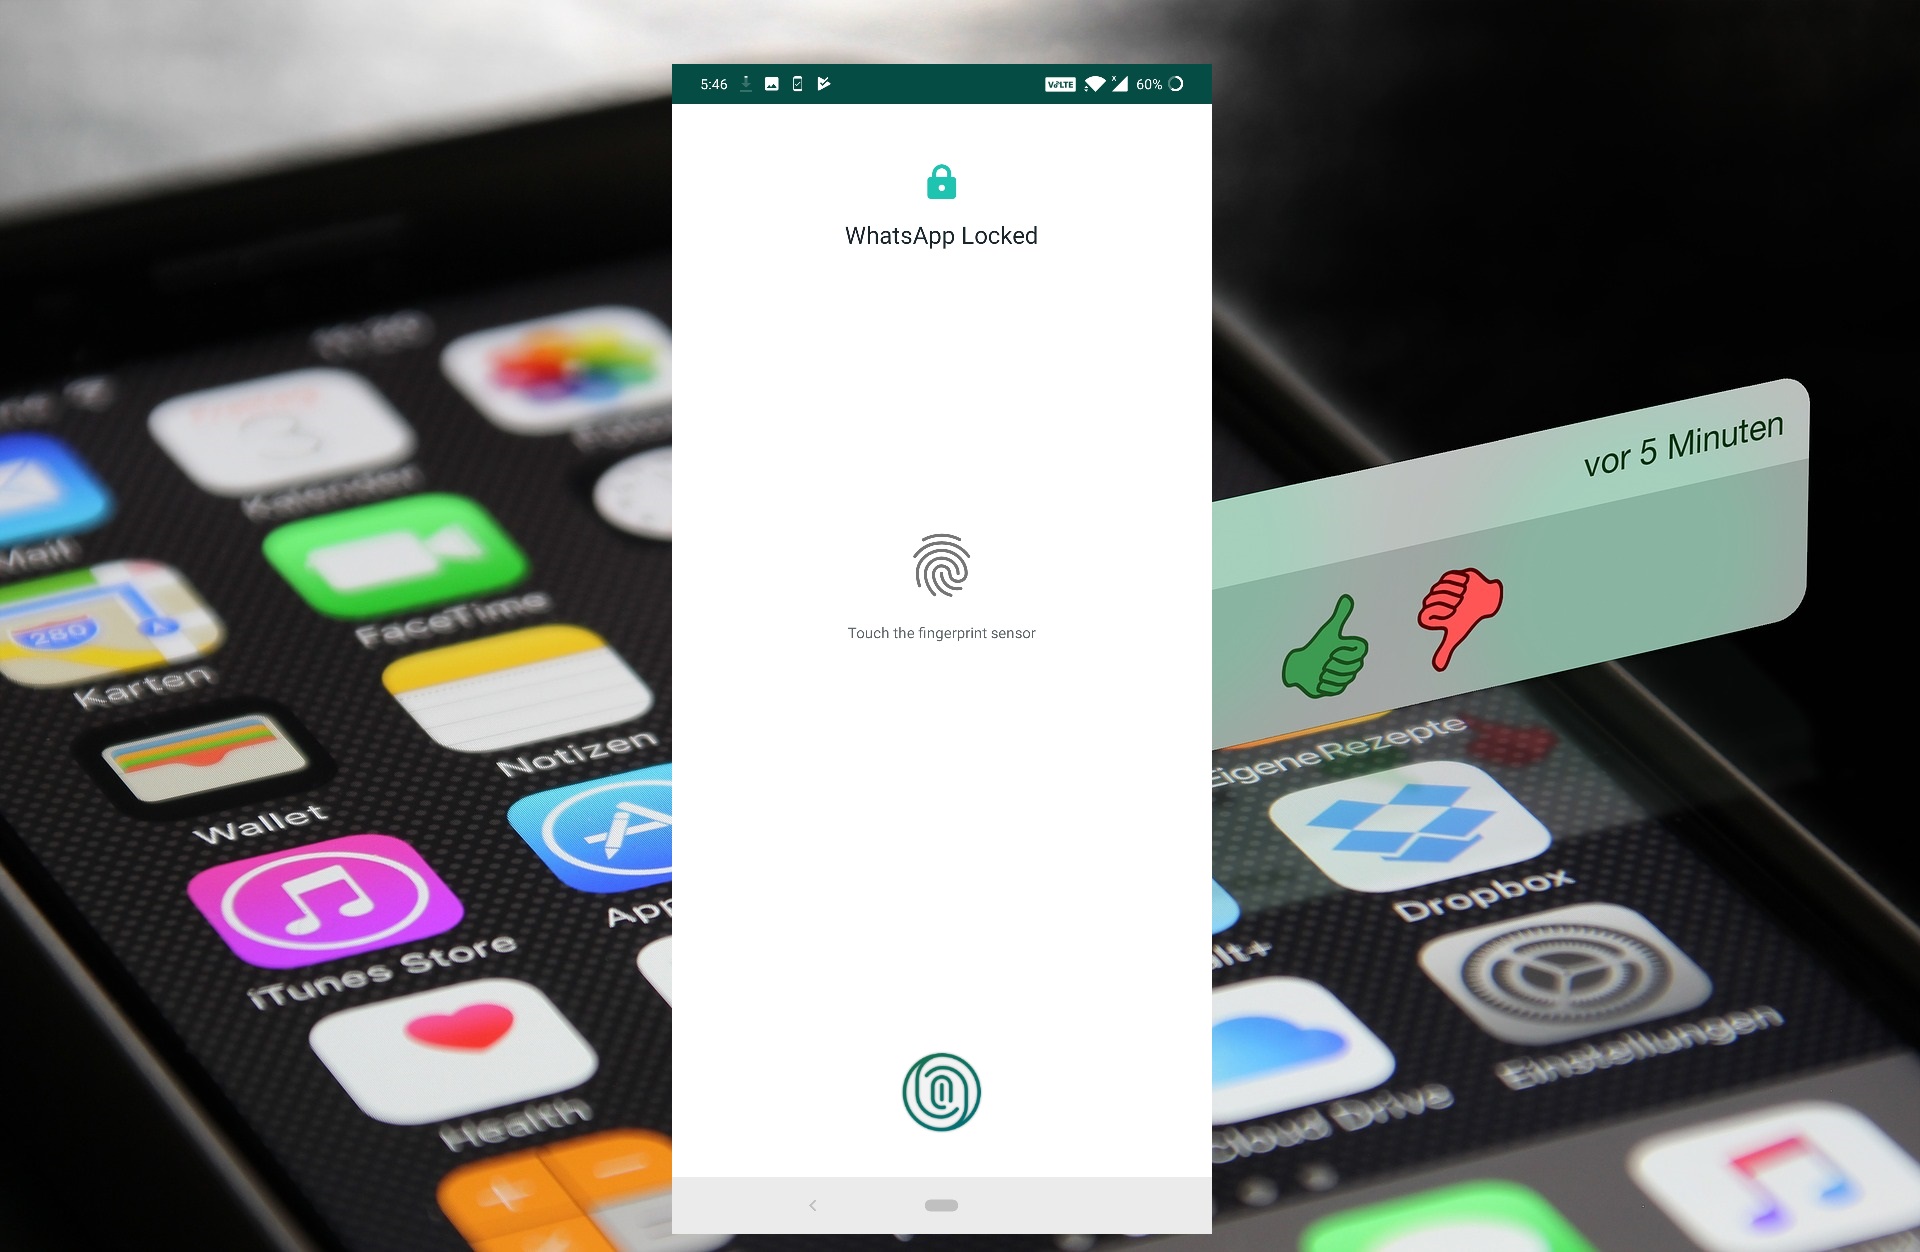 How to Enable WhatsApp Fingerprint Lock Feature on Android?